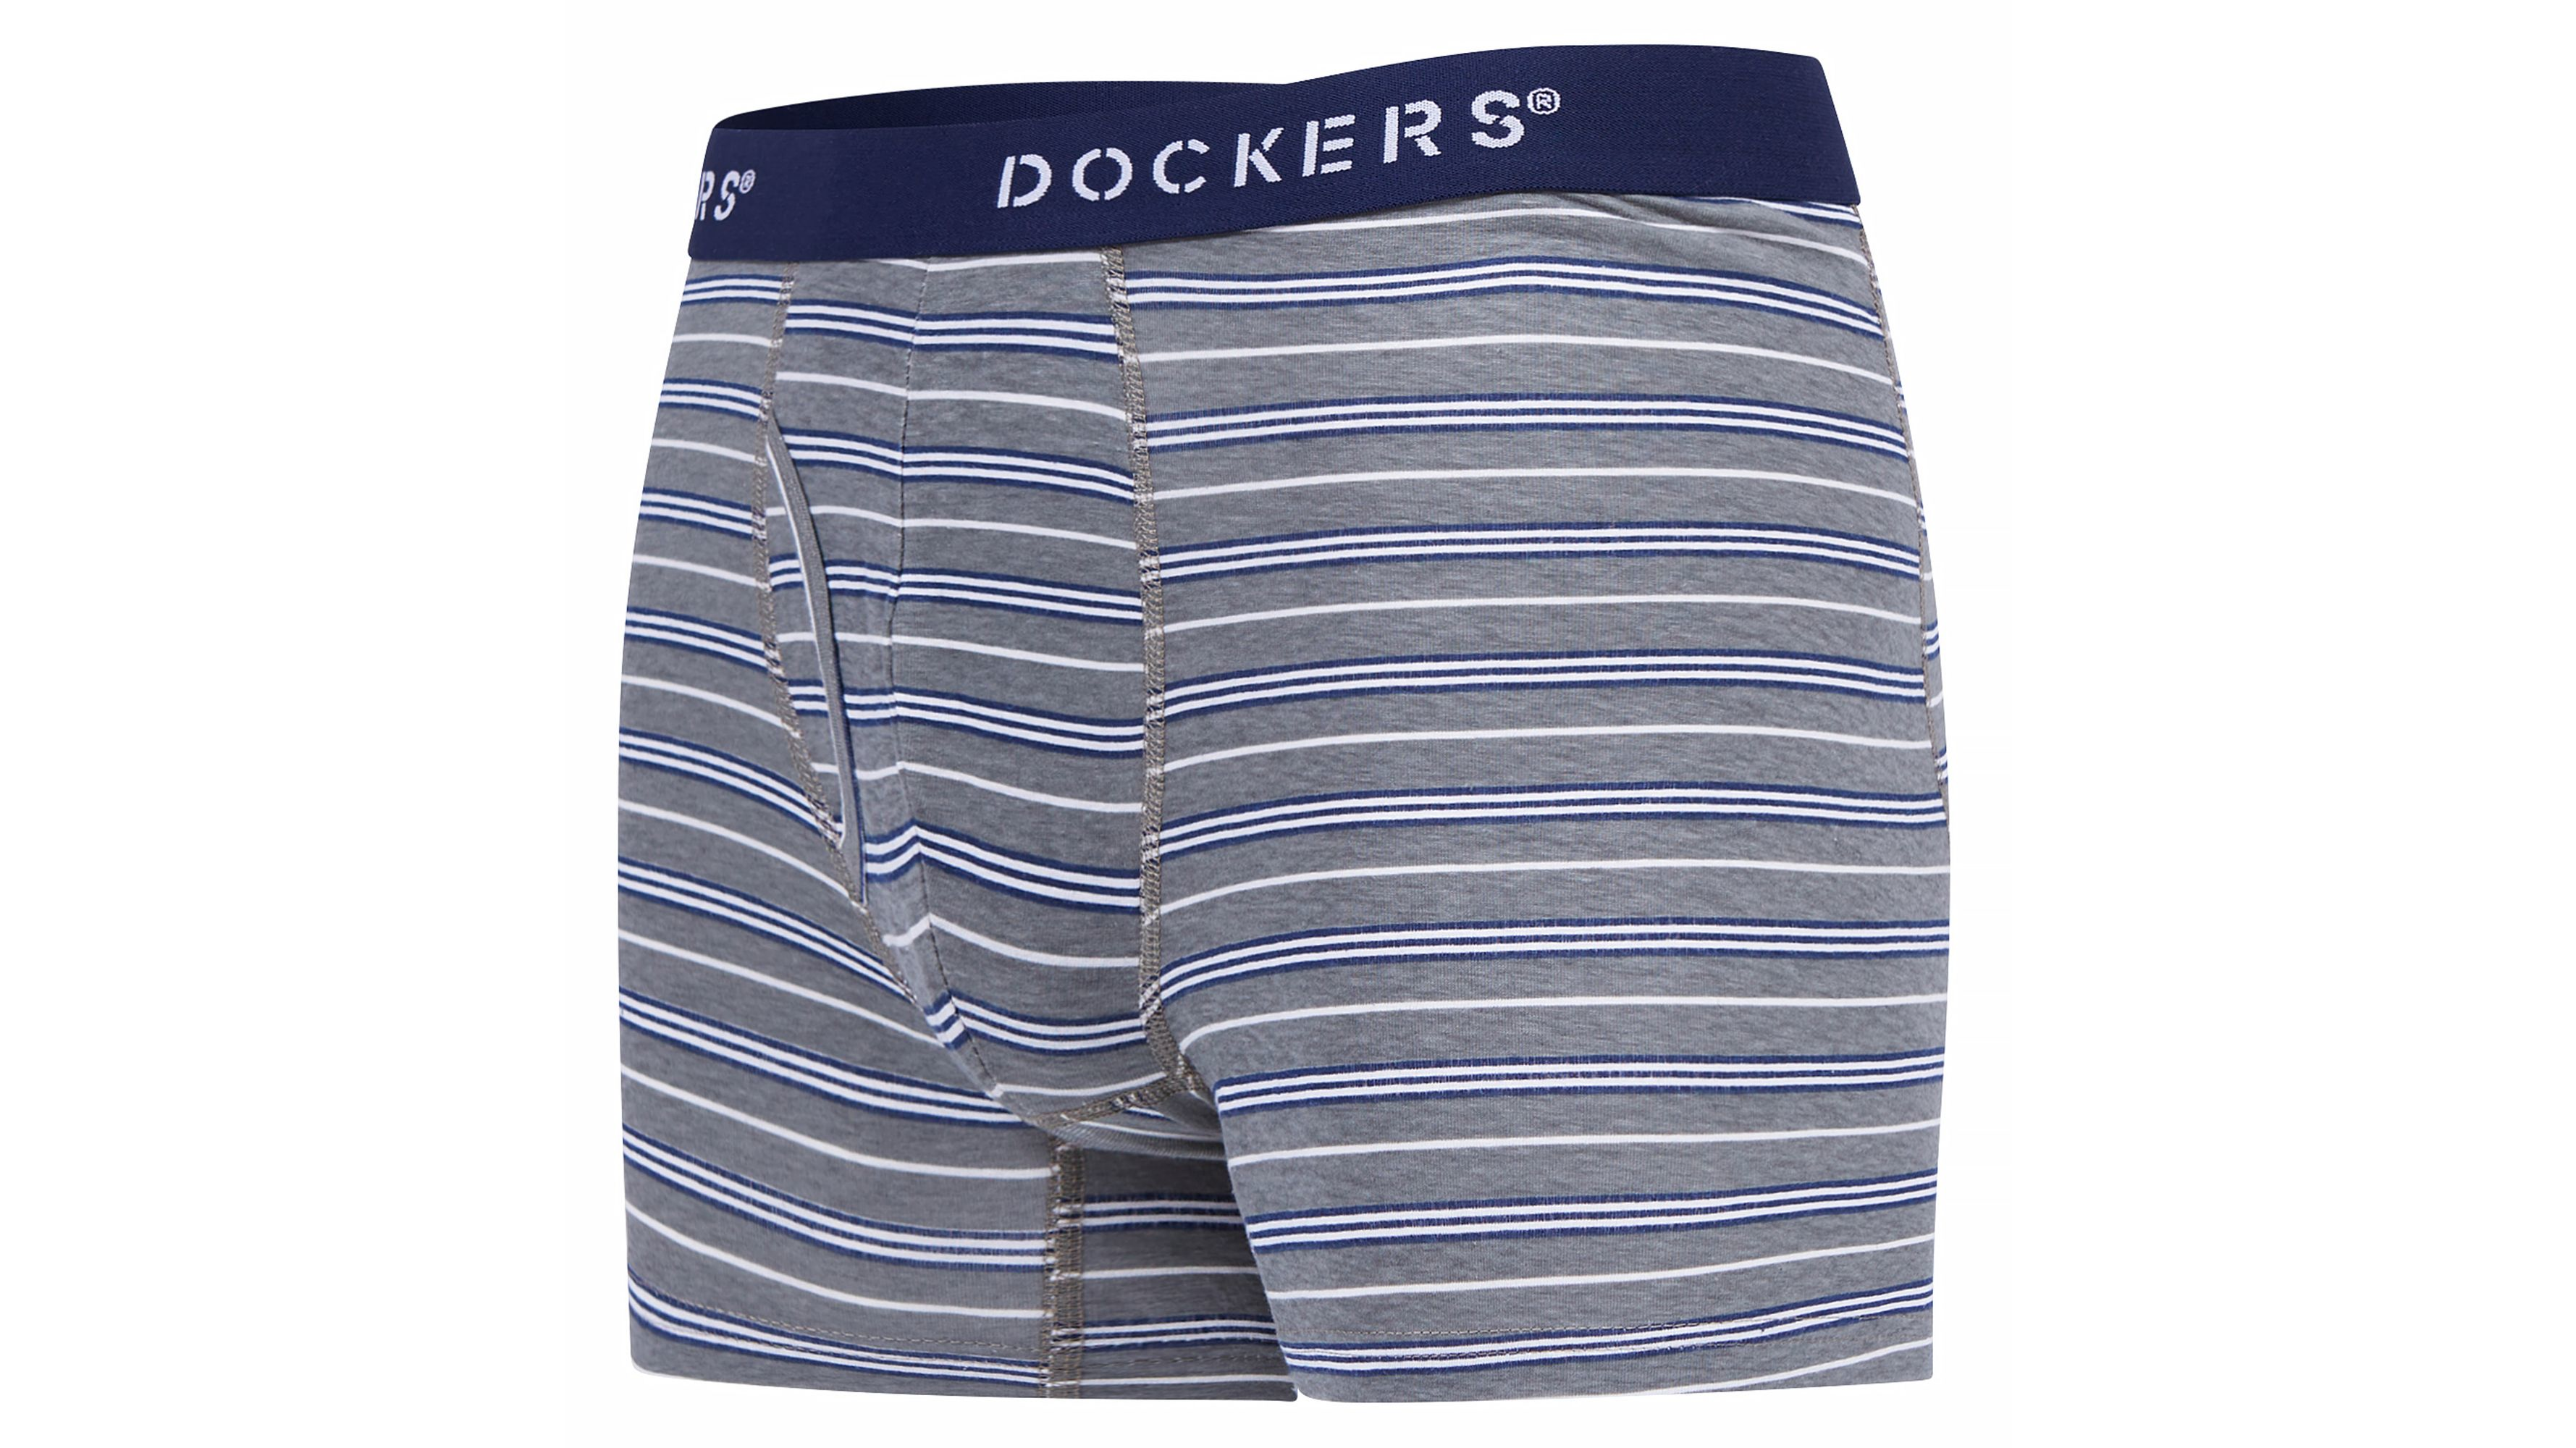 Cotton Stretch Boxer Brief, 4 Pack – Dockers®